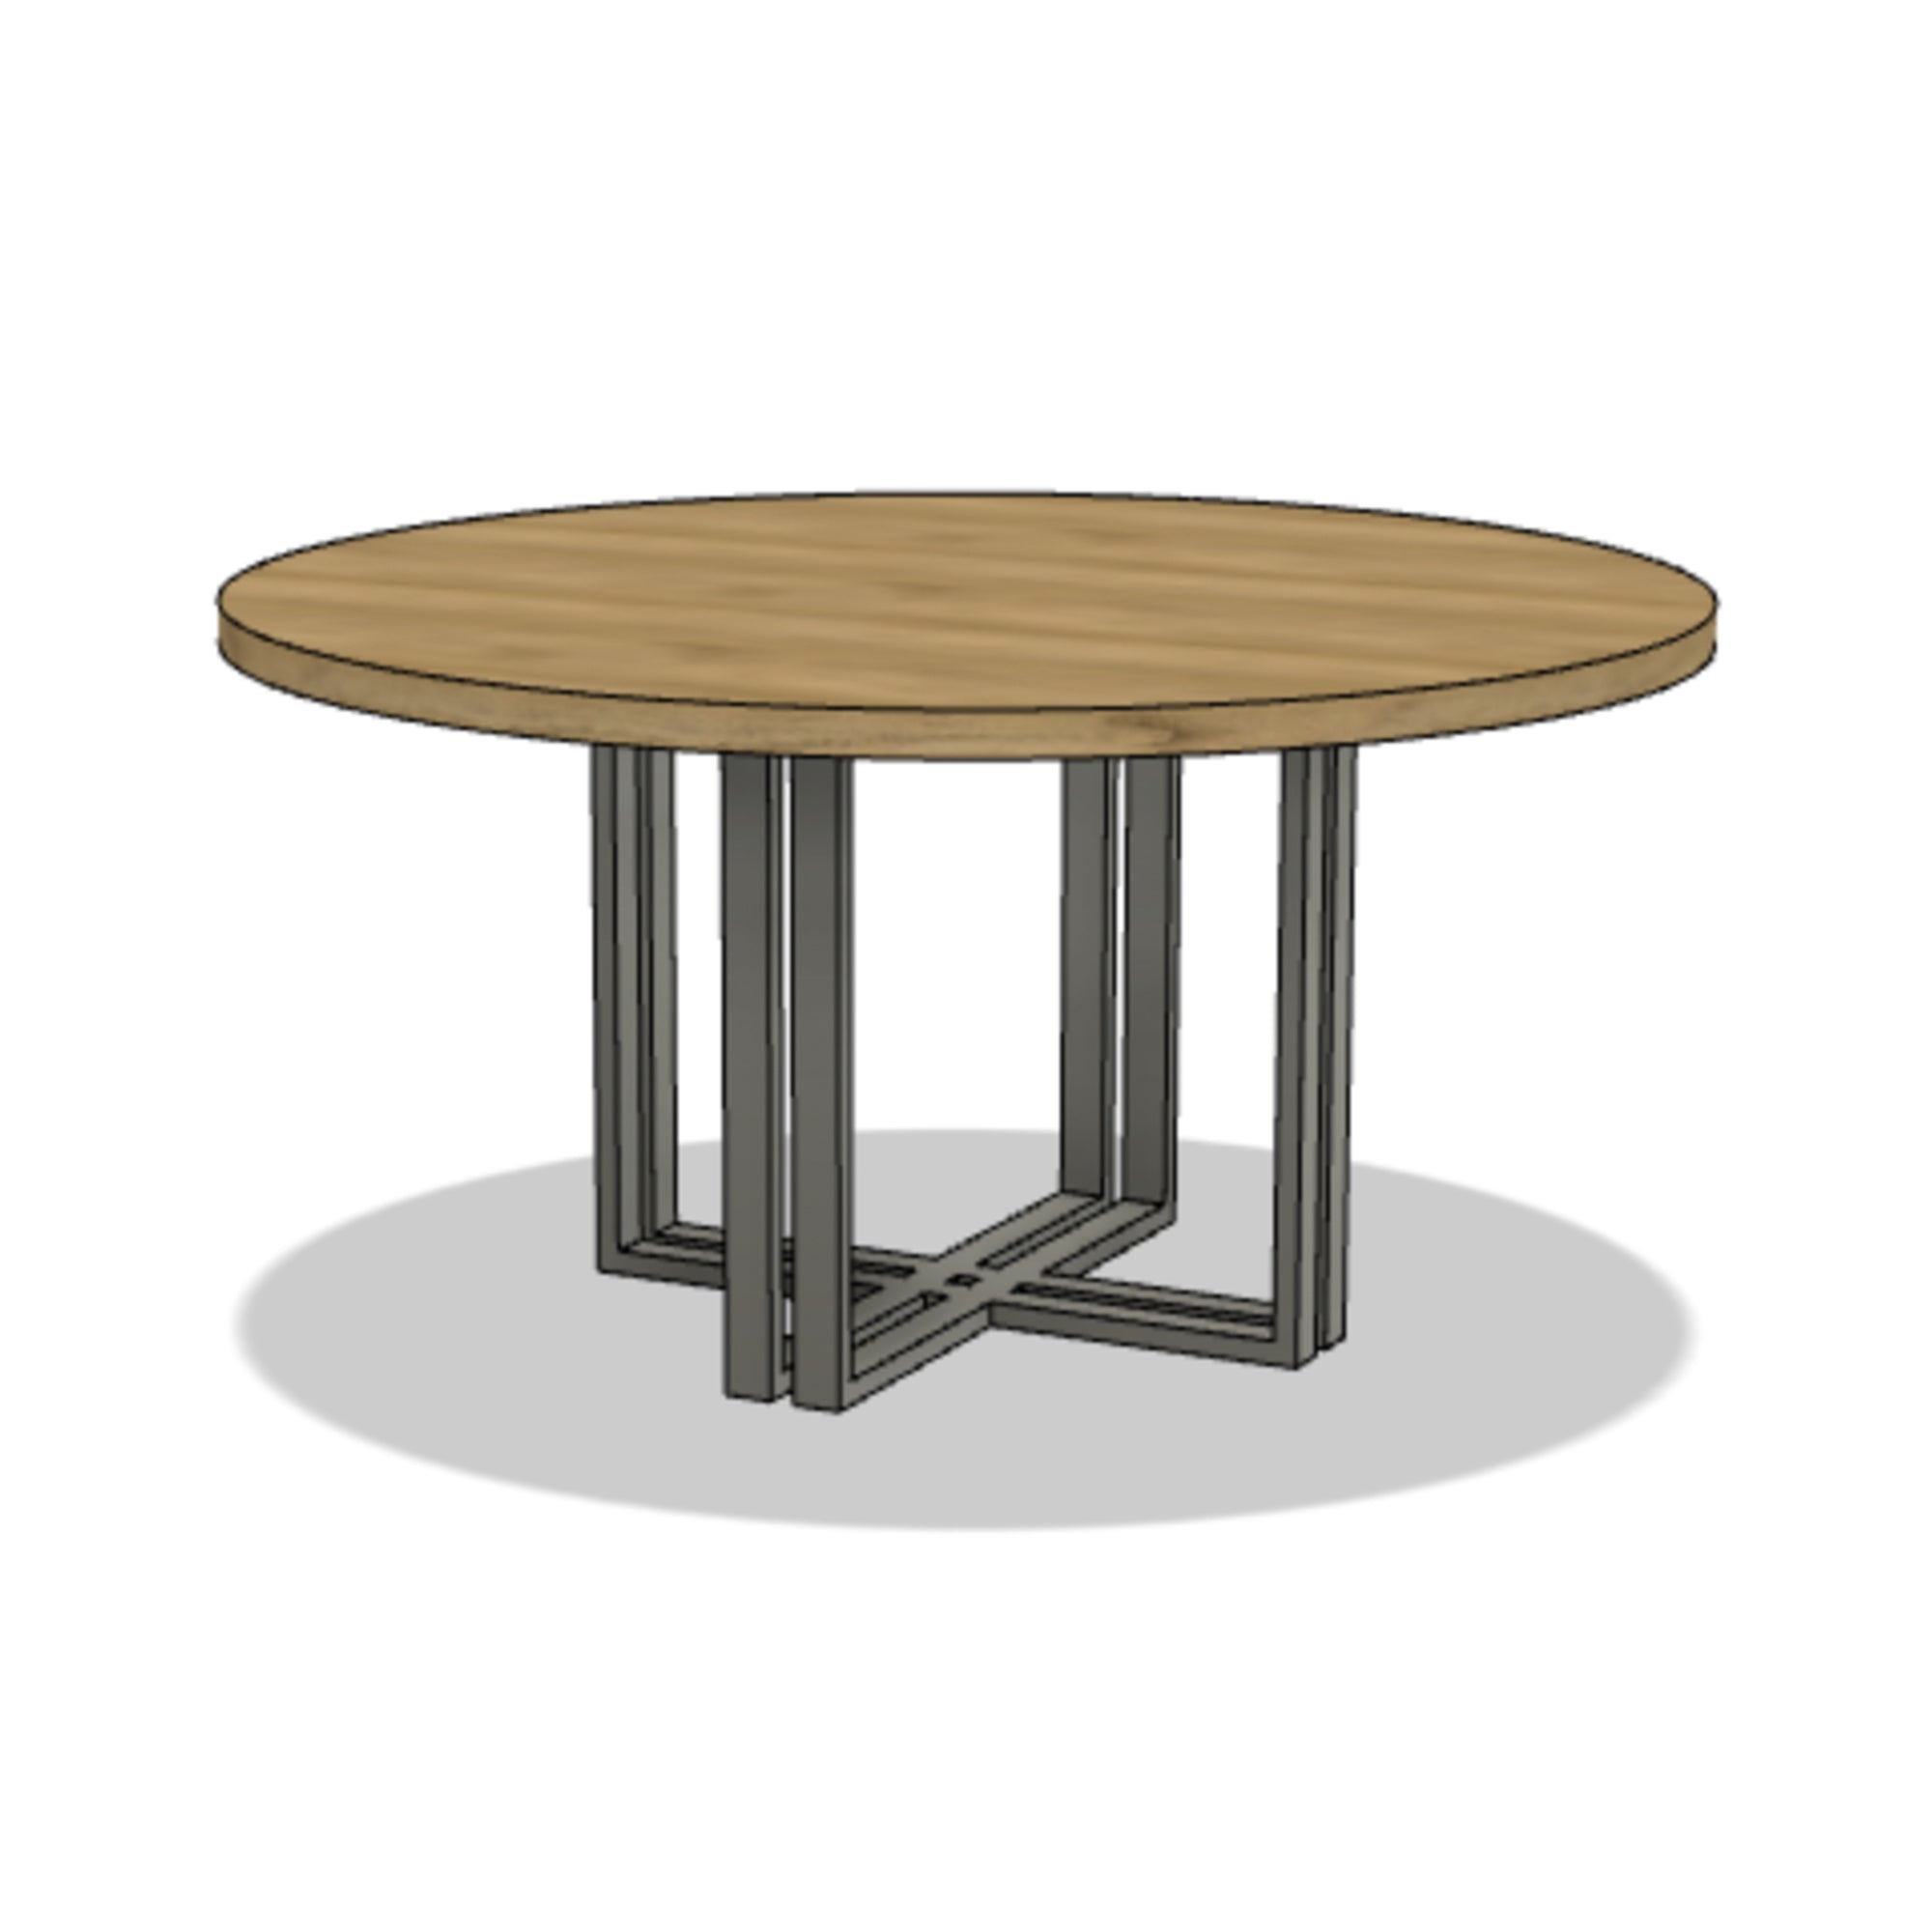 Wb dining table (outdoor) images. Dining Room American Estates